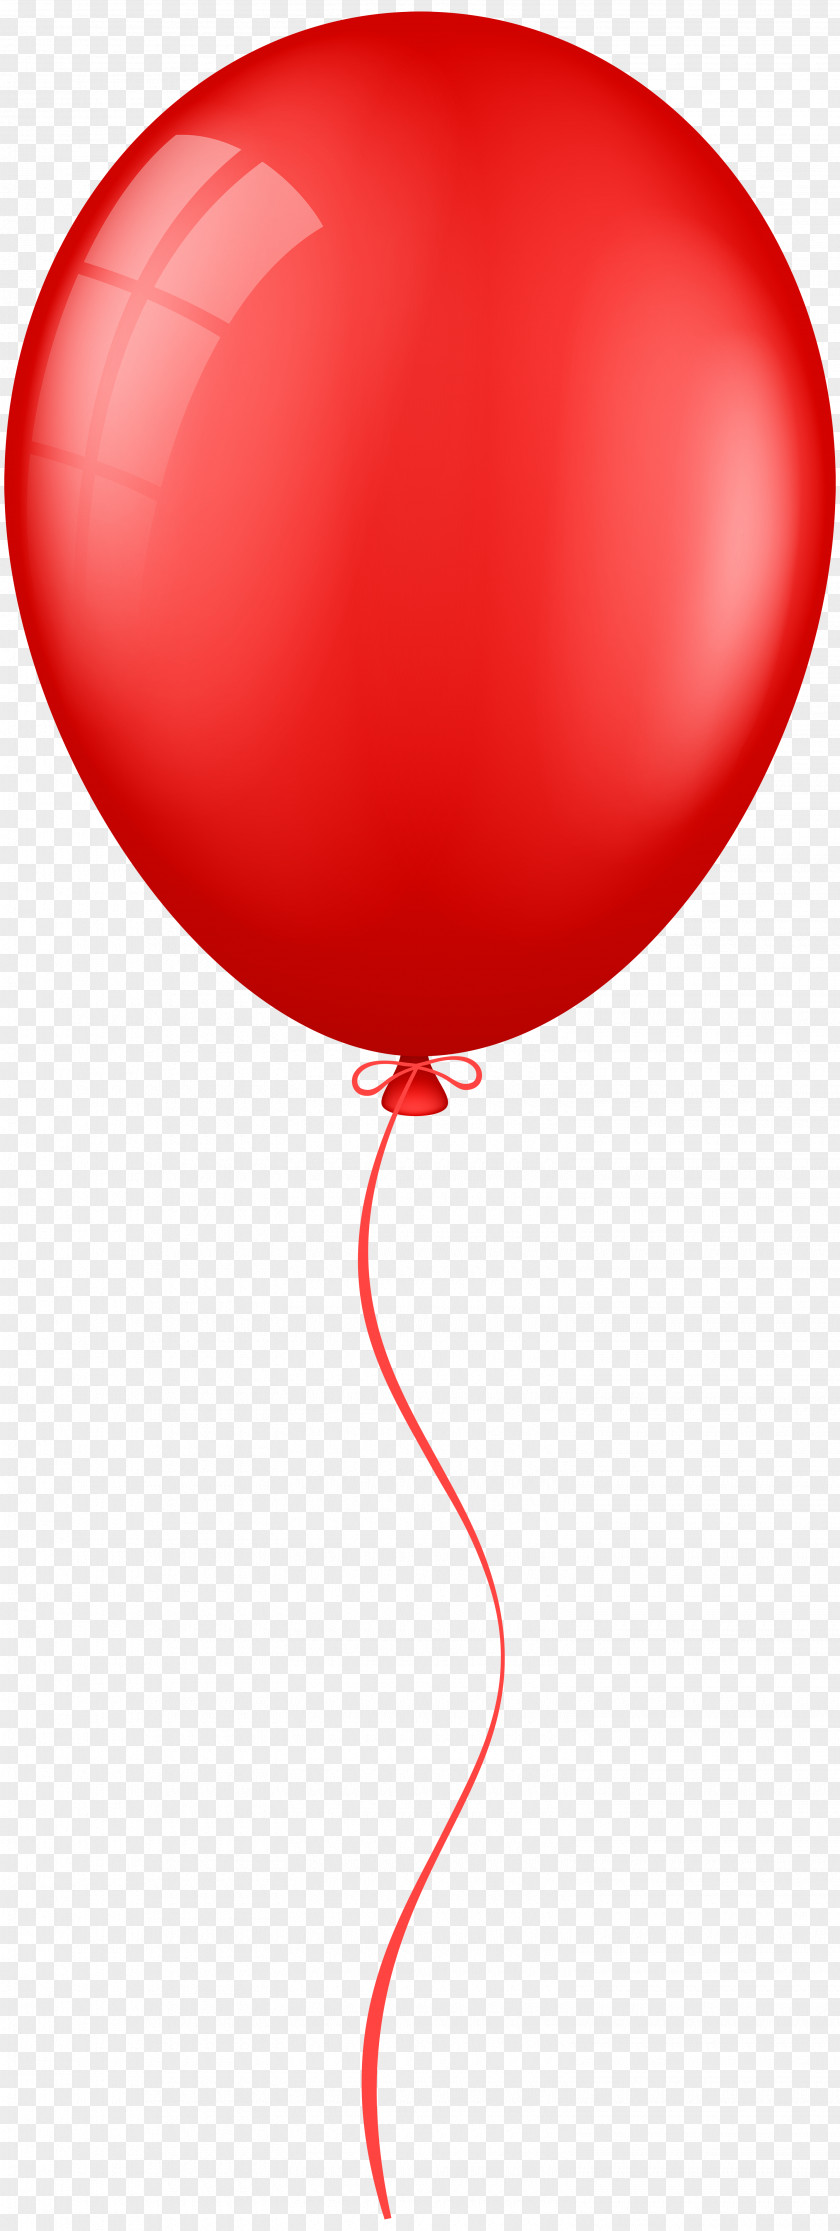 Watercolor Balloon Red Clip Art PNG